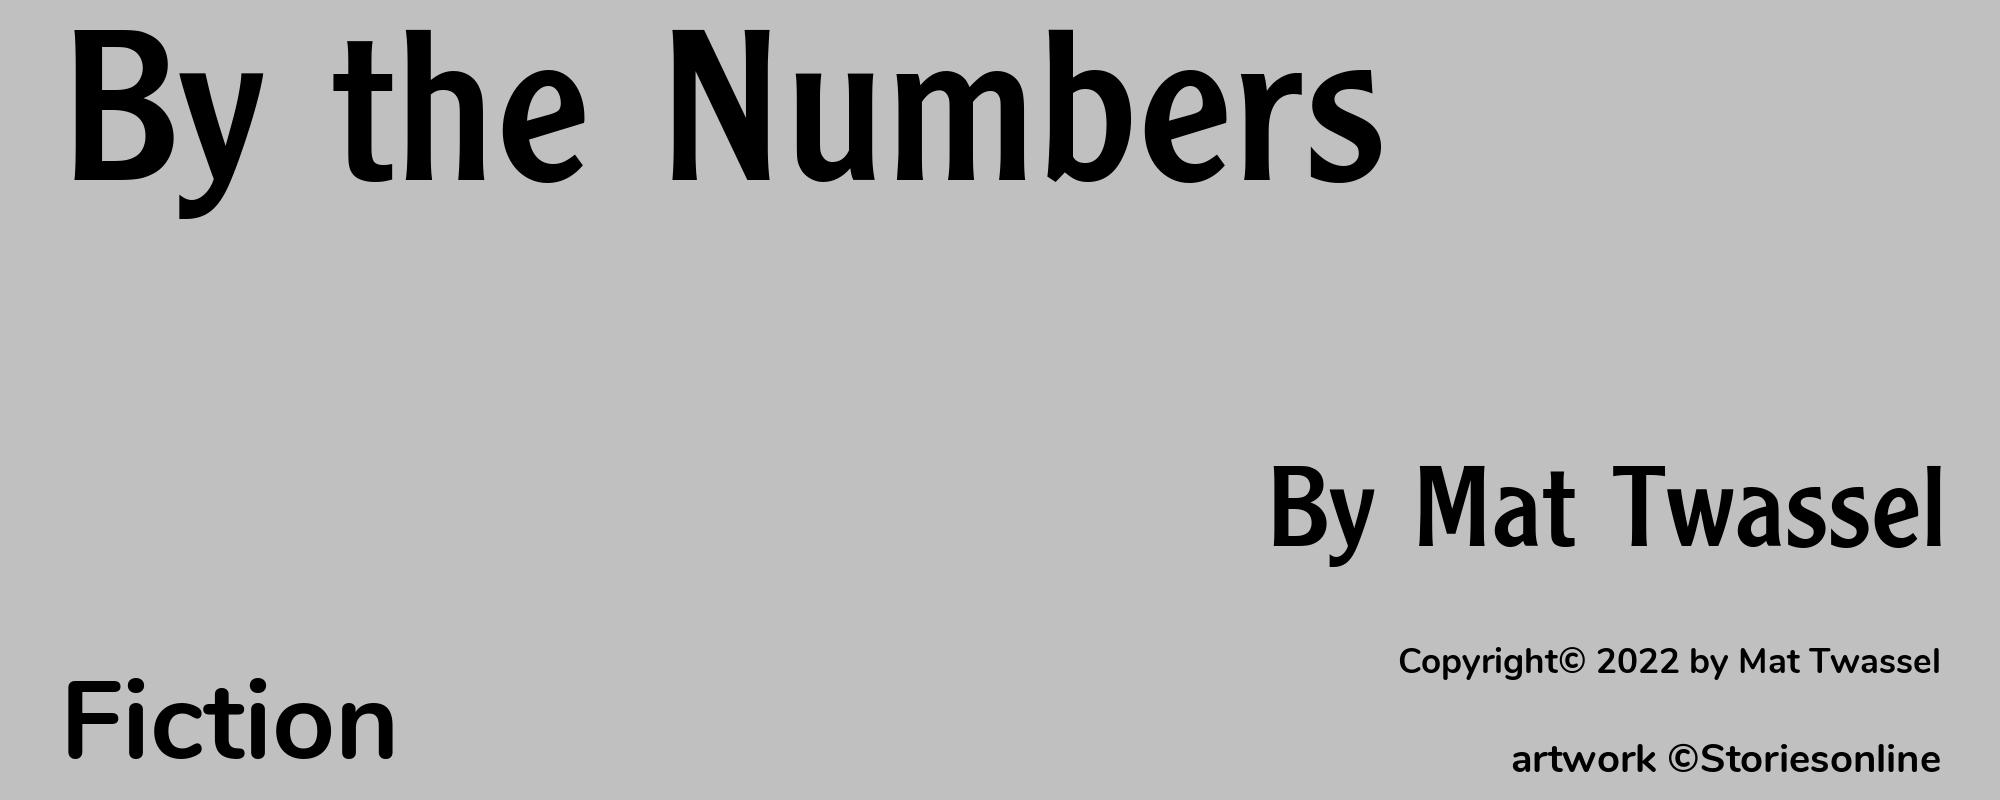 By the Numbers - Cover